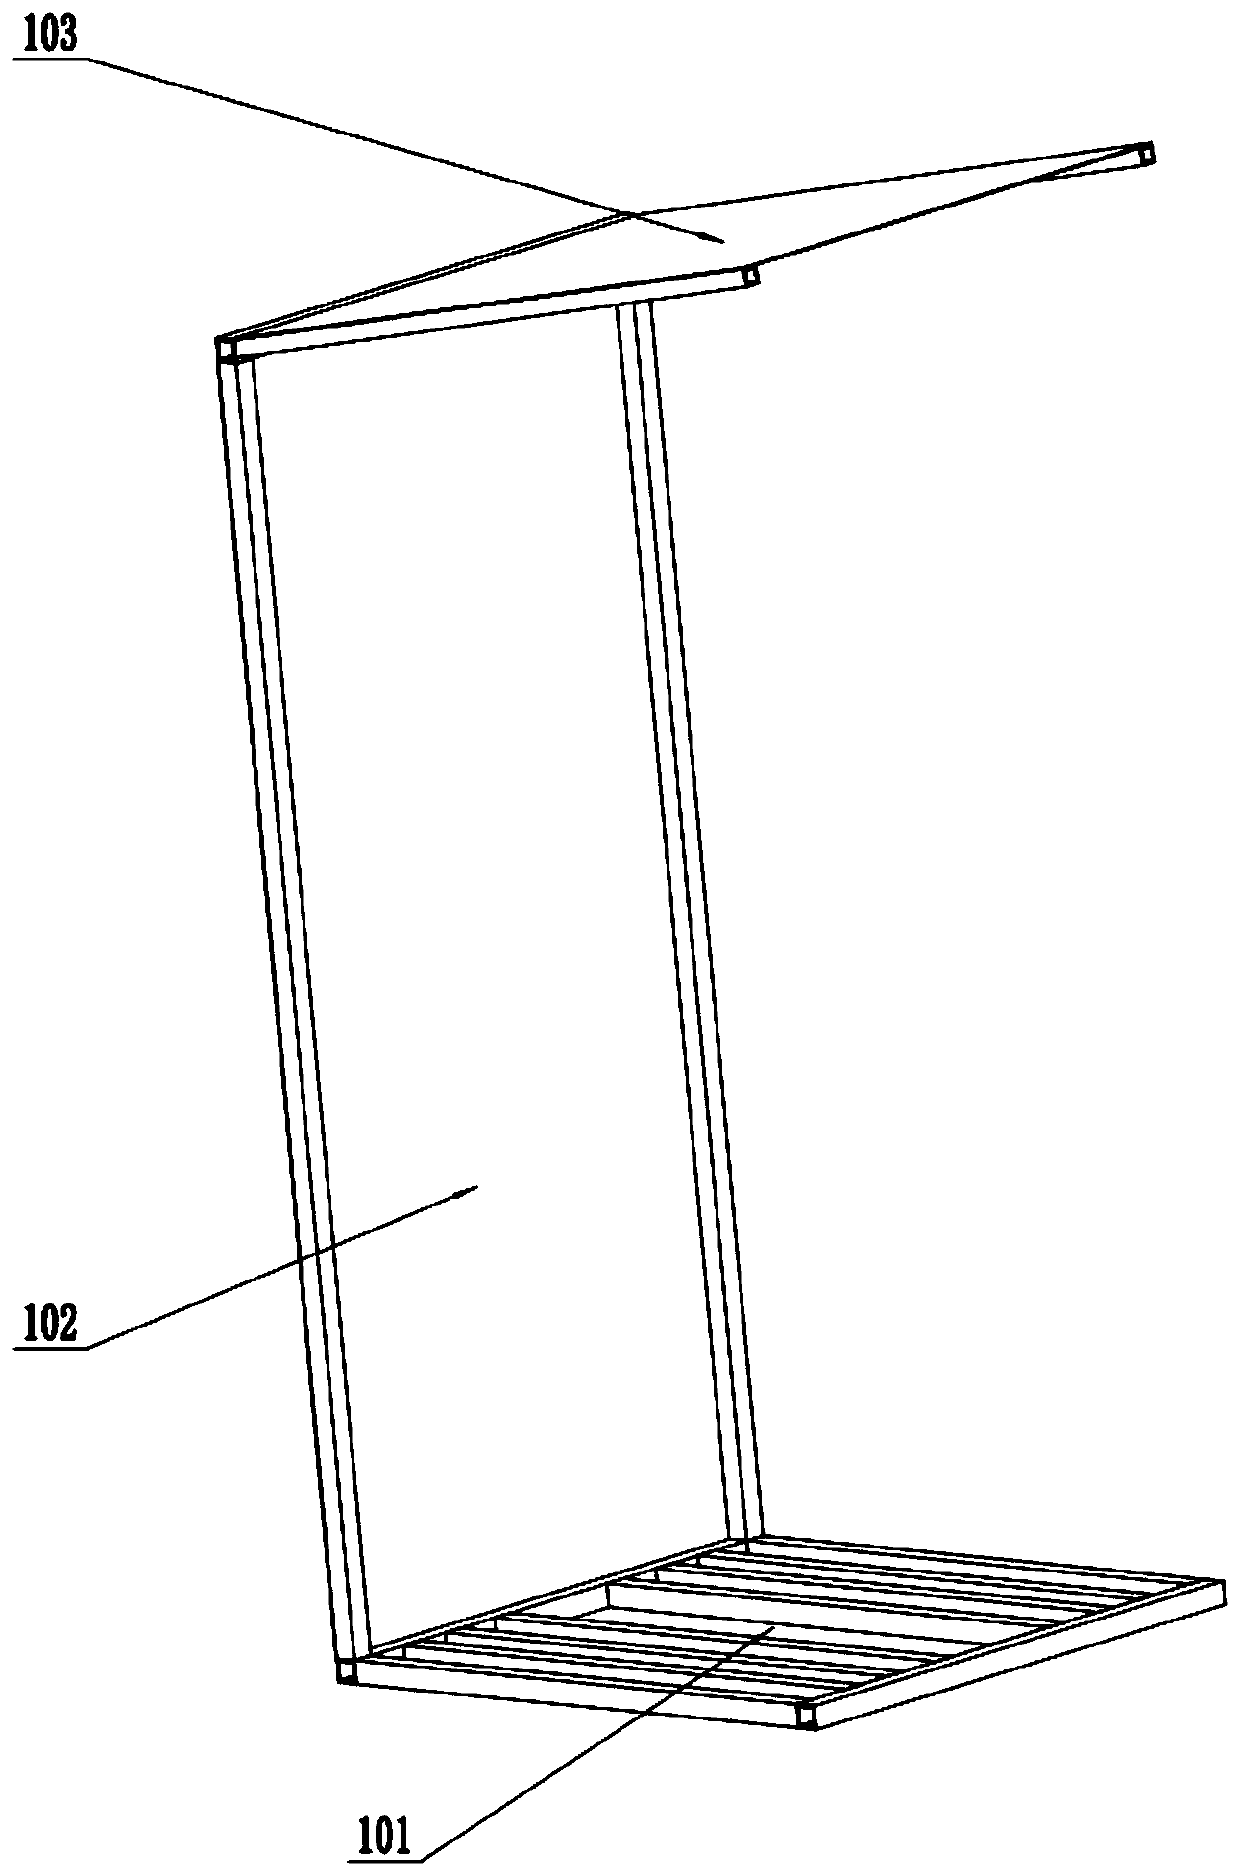 An upright bicycle or electric vehicle parking device